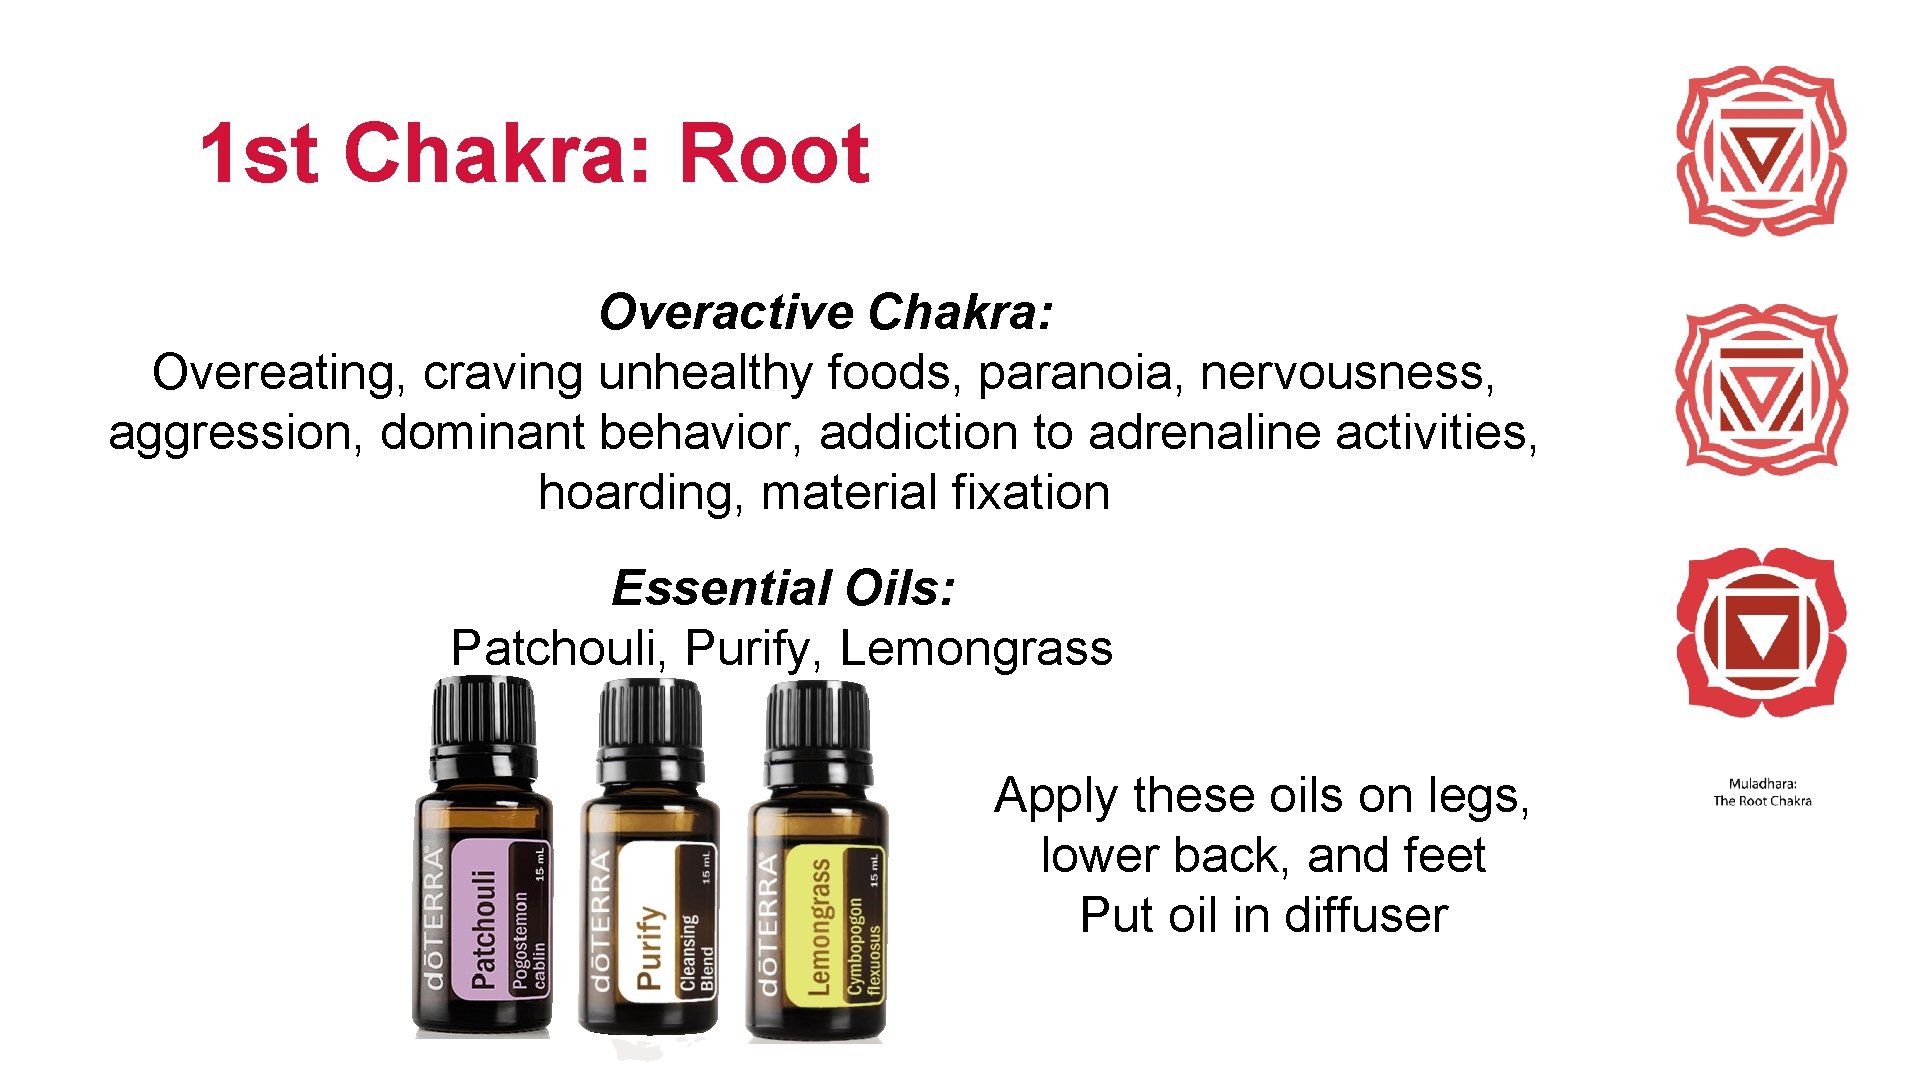 1 st Chakra: Root Overactive Chakra: Overeating, craving unhealthy foods, paranoia, nervousness, aggression, dominant